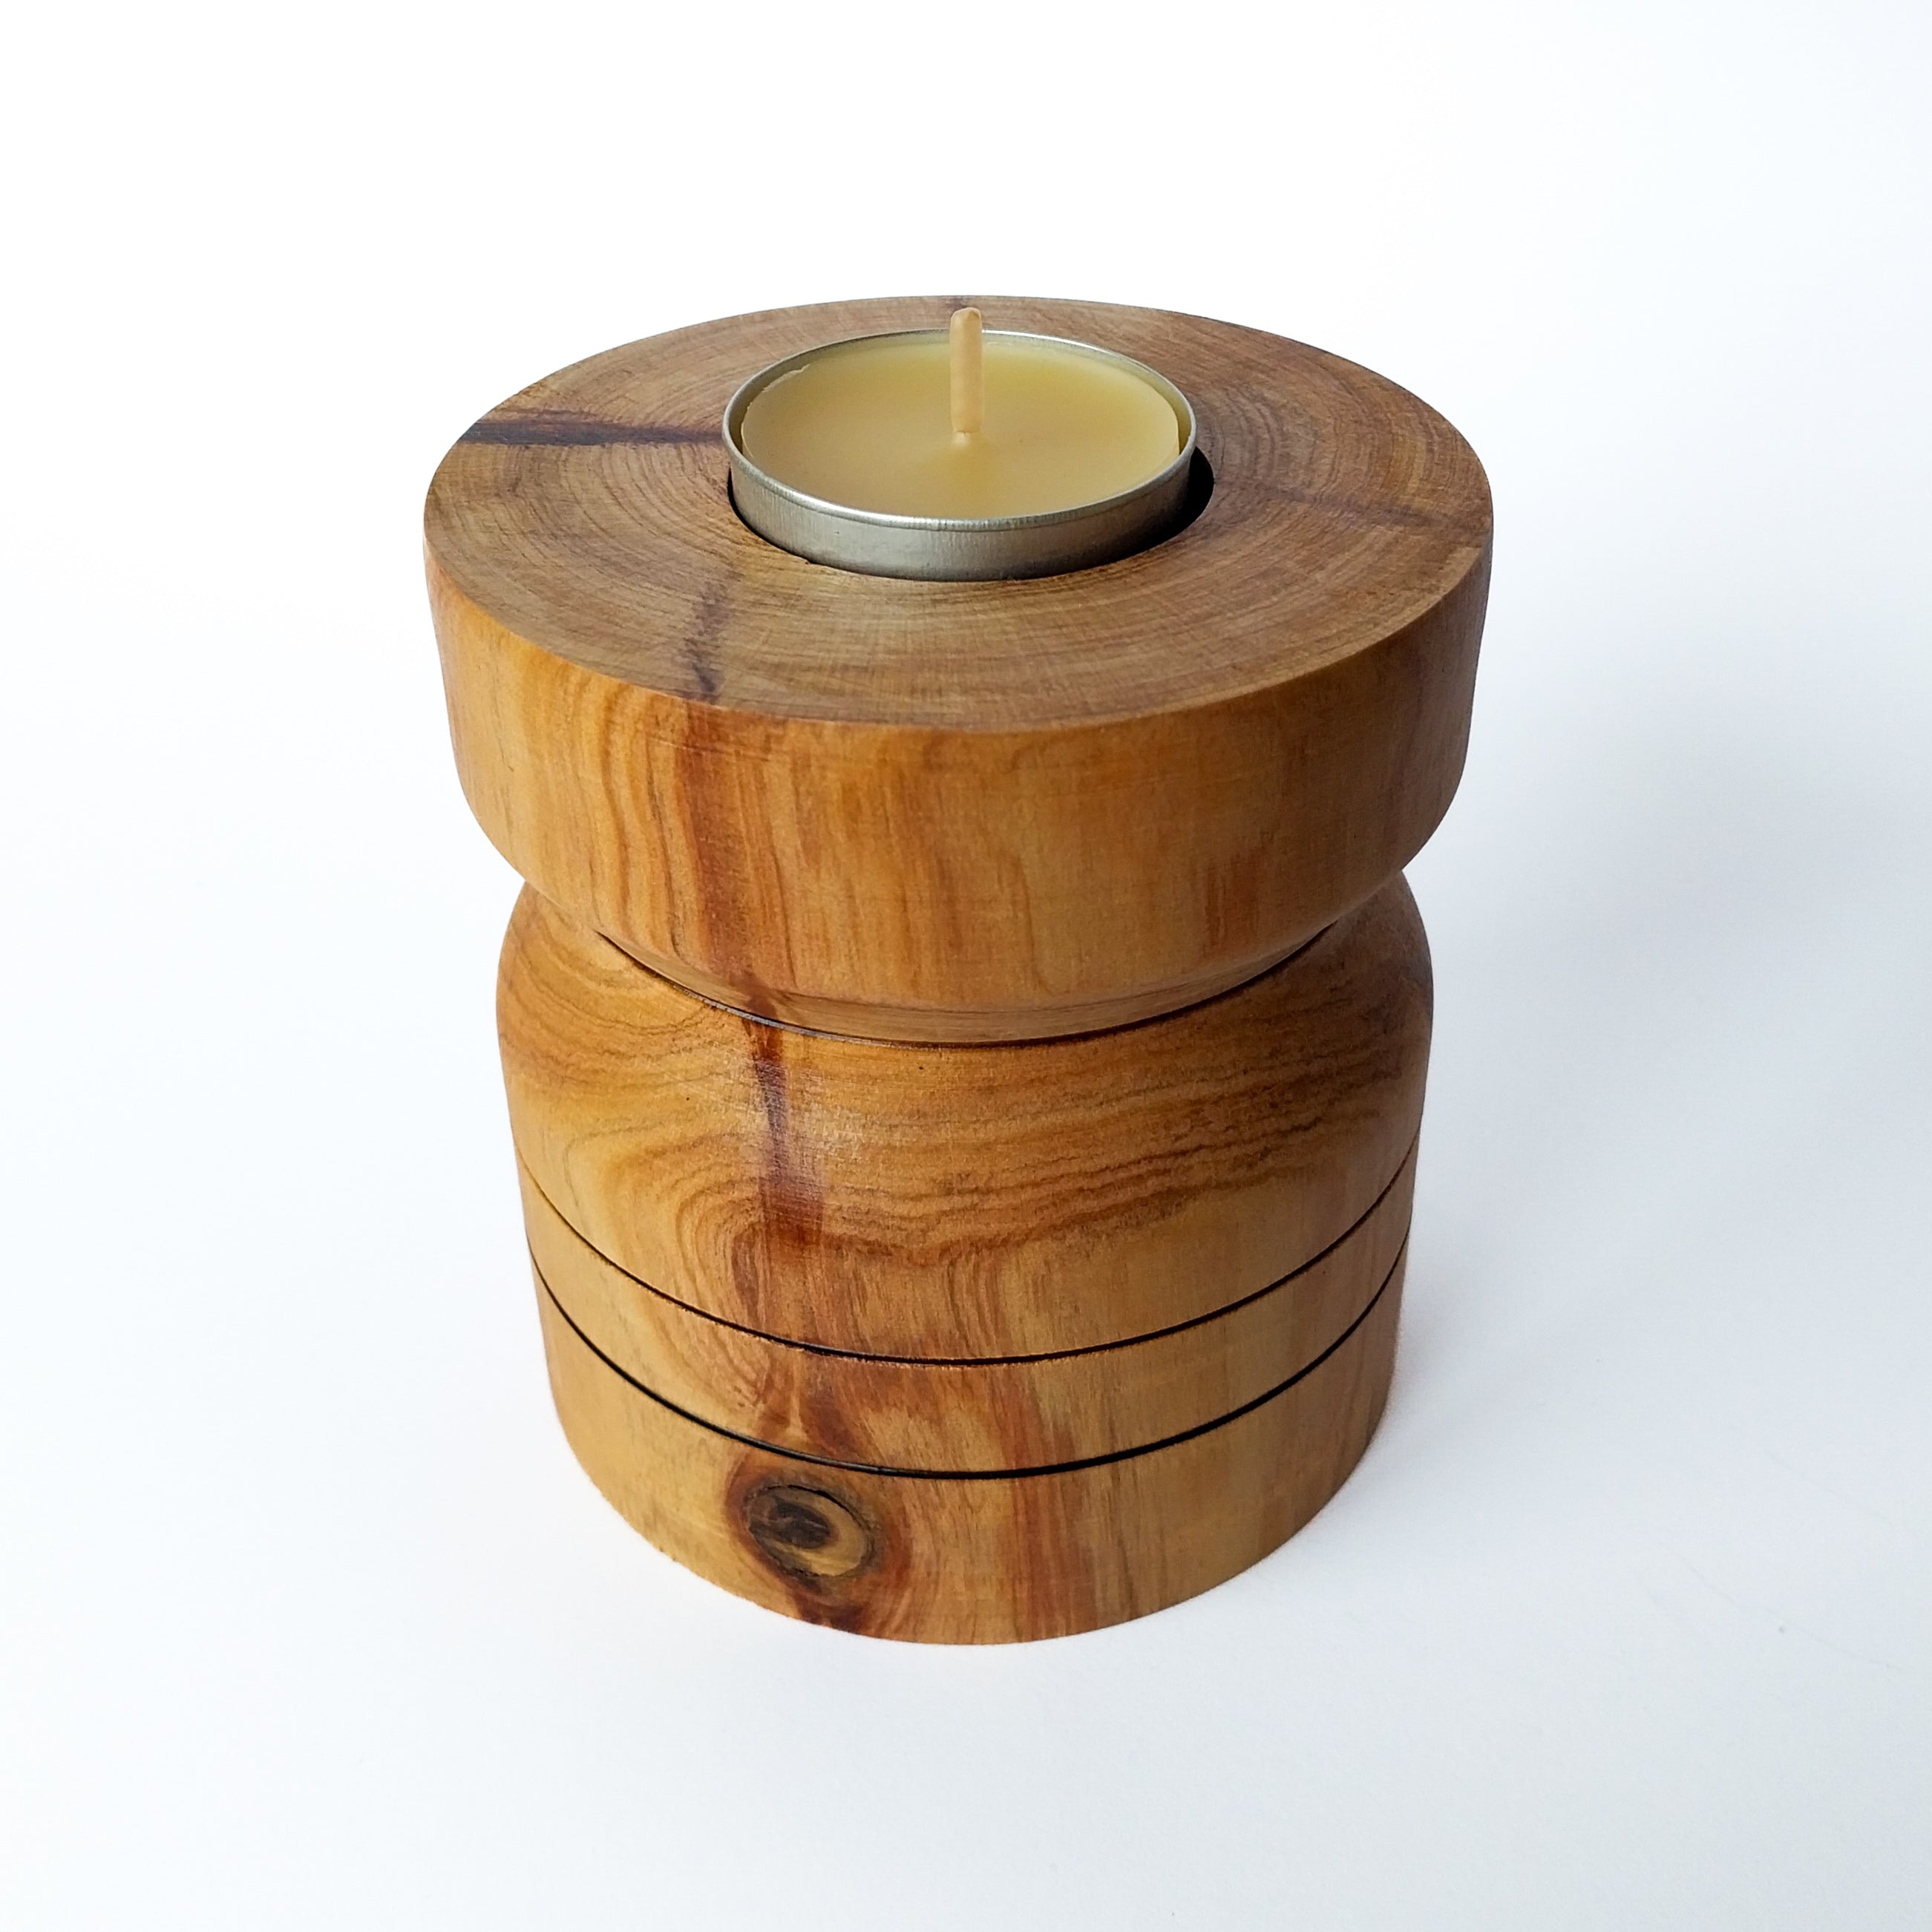 Candle Holder - Cypress Pine